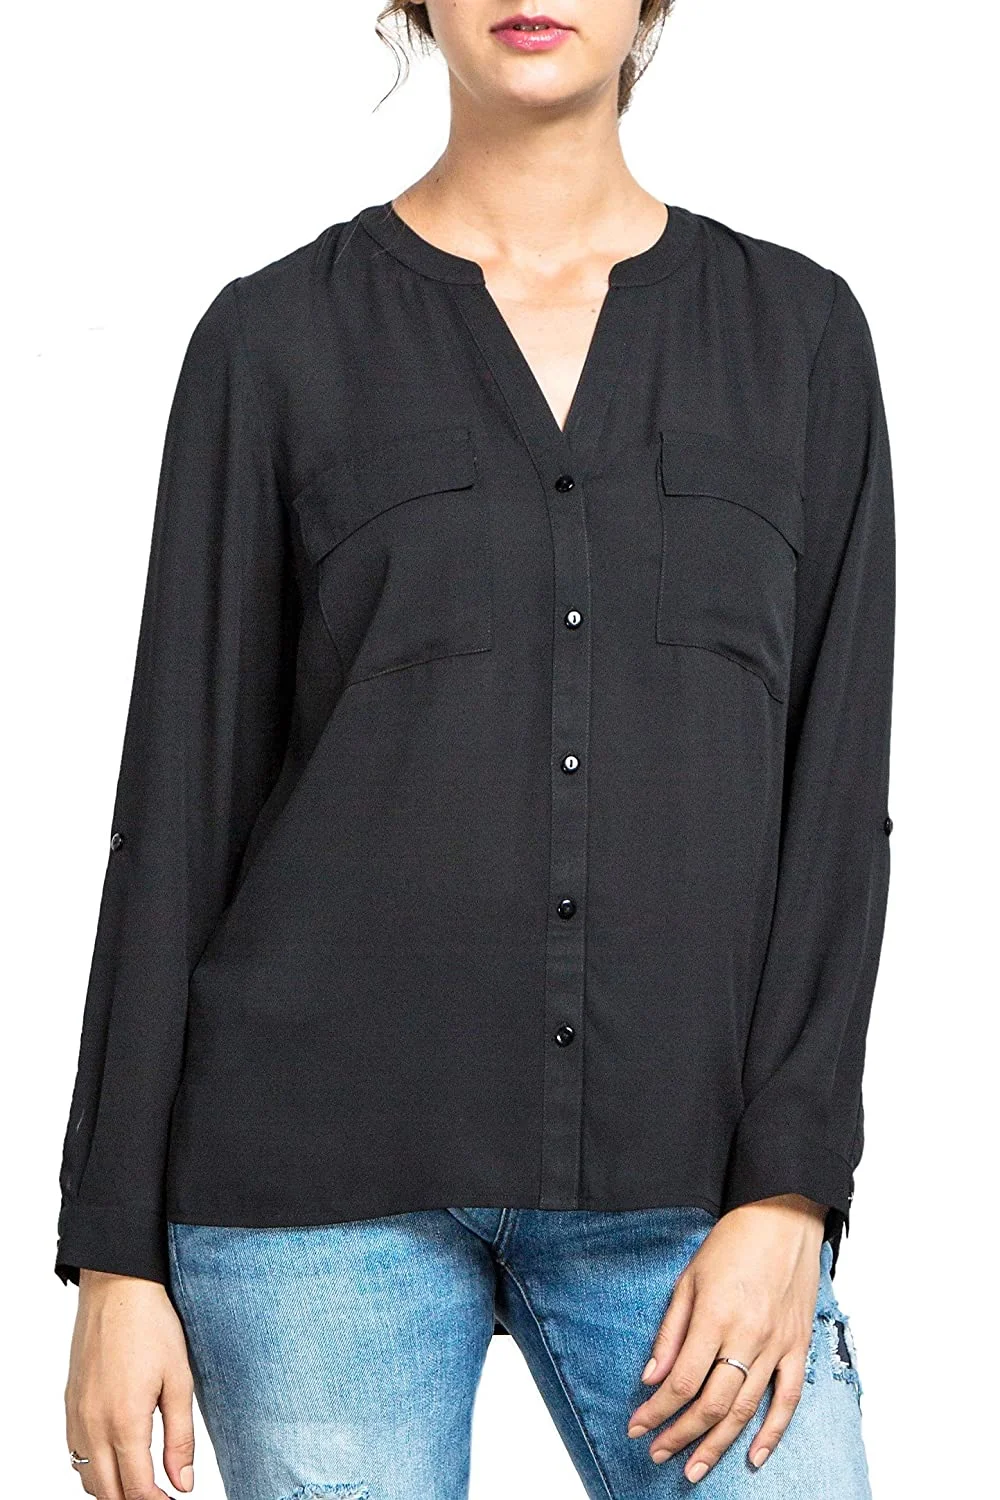 Womens Button UP Chiffon Blouse, 3/4 Roll Up Sleeves, Functional Chest Pockets, High Low Hem, Wear to Work